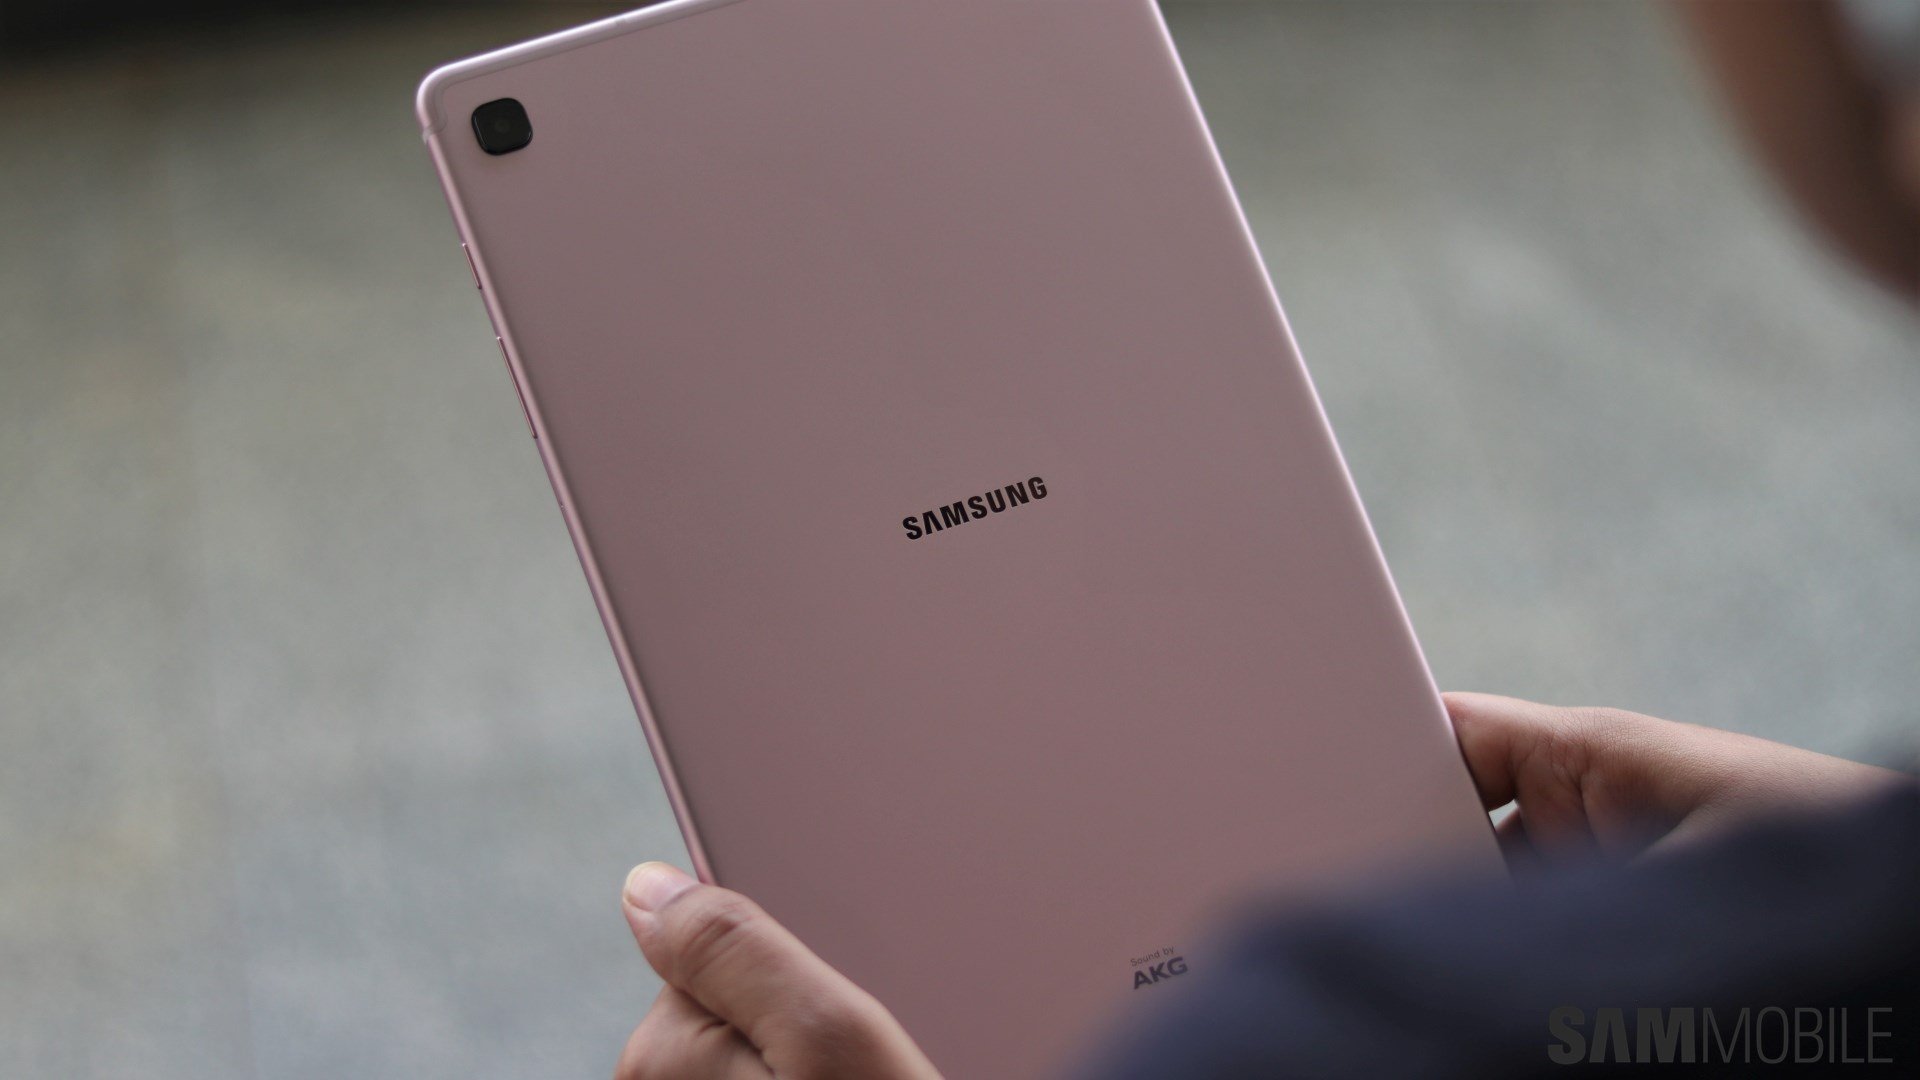 Samsung Galaxy Tab S6 Lite listed on official Samsung site